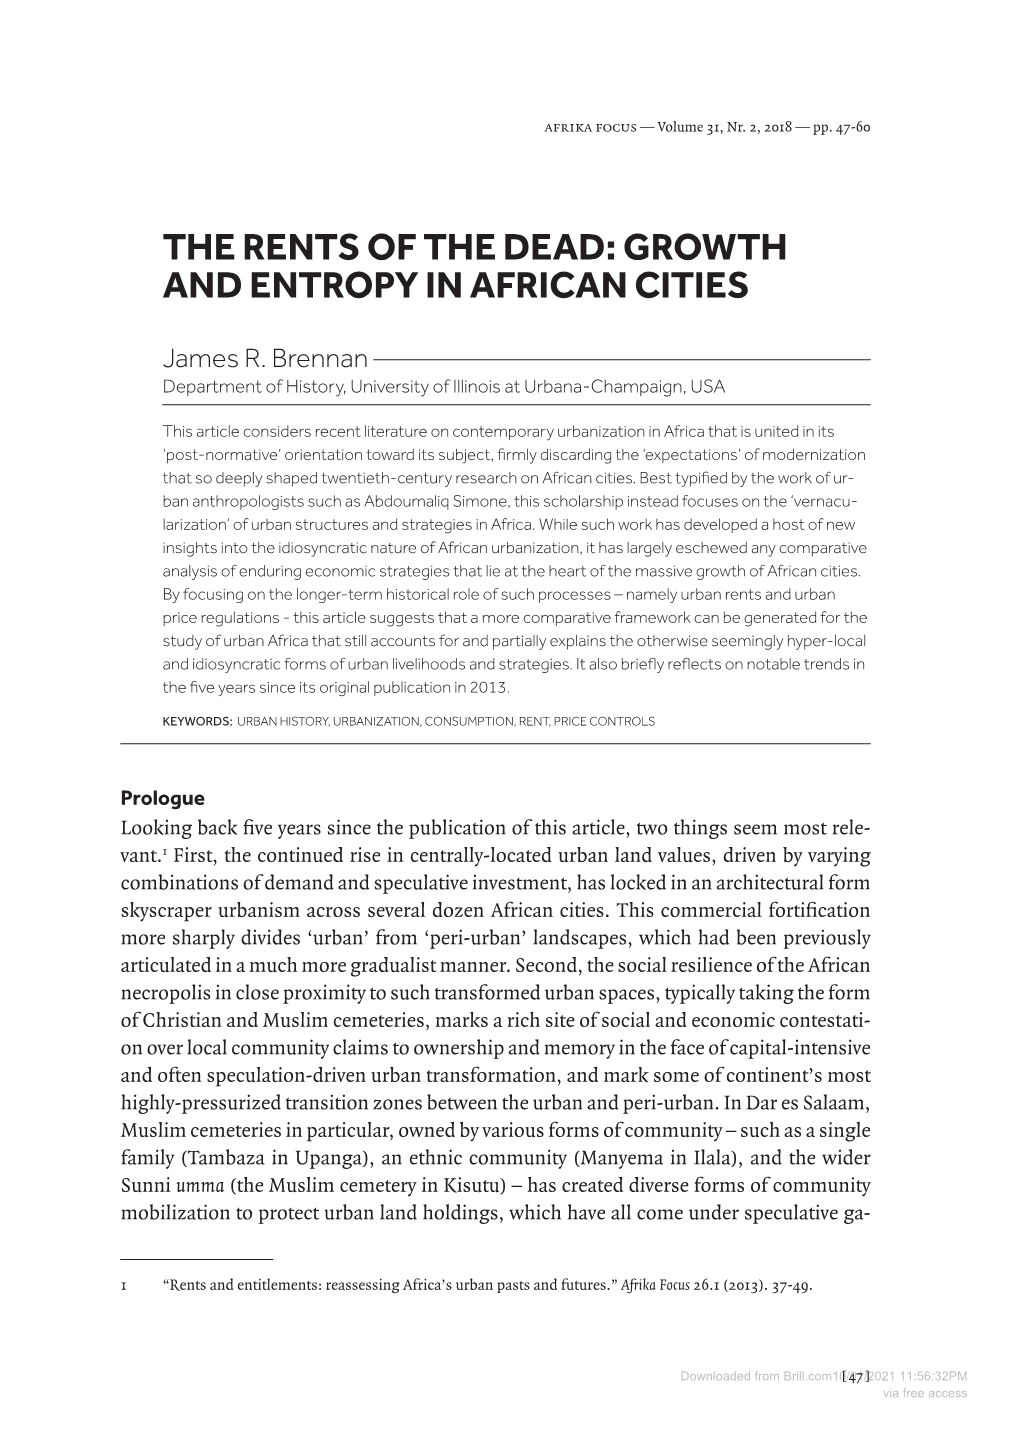 The Rents of the Dead: Growth and Entropy in African Cities